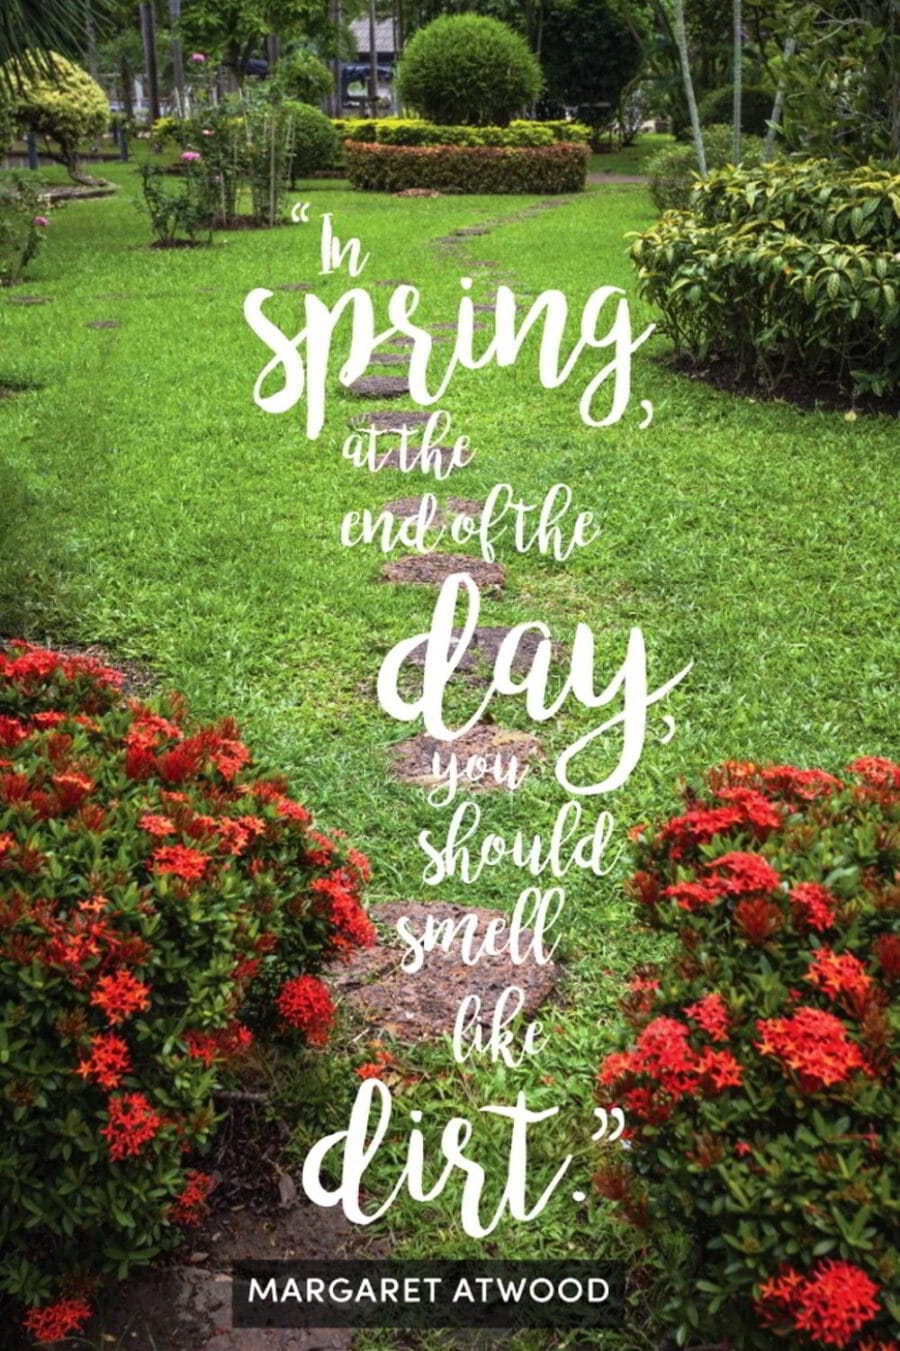 happy spring day quotes